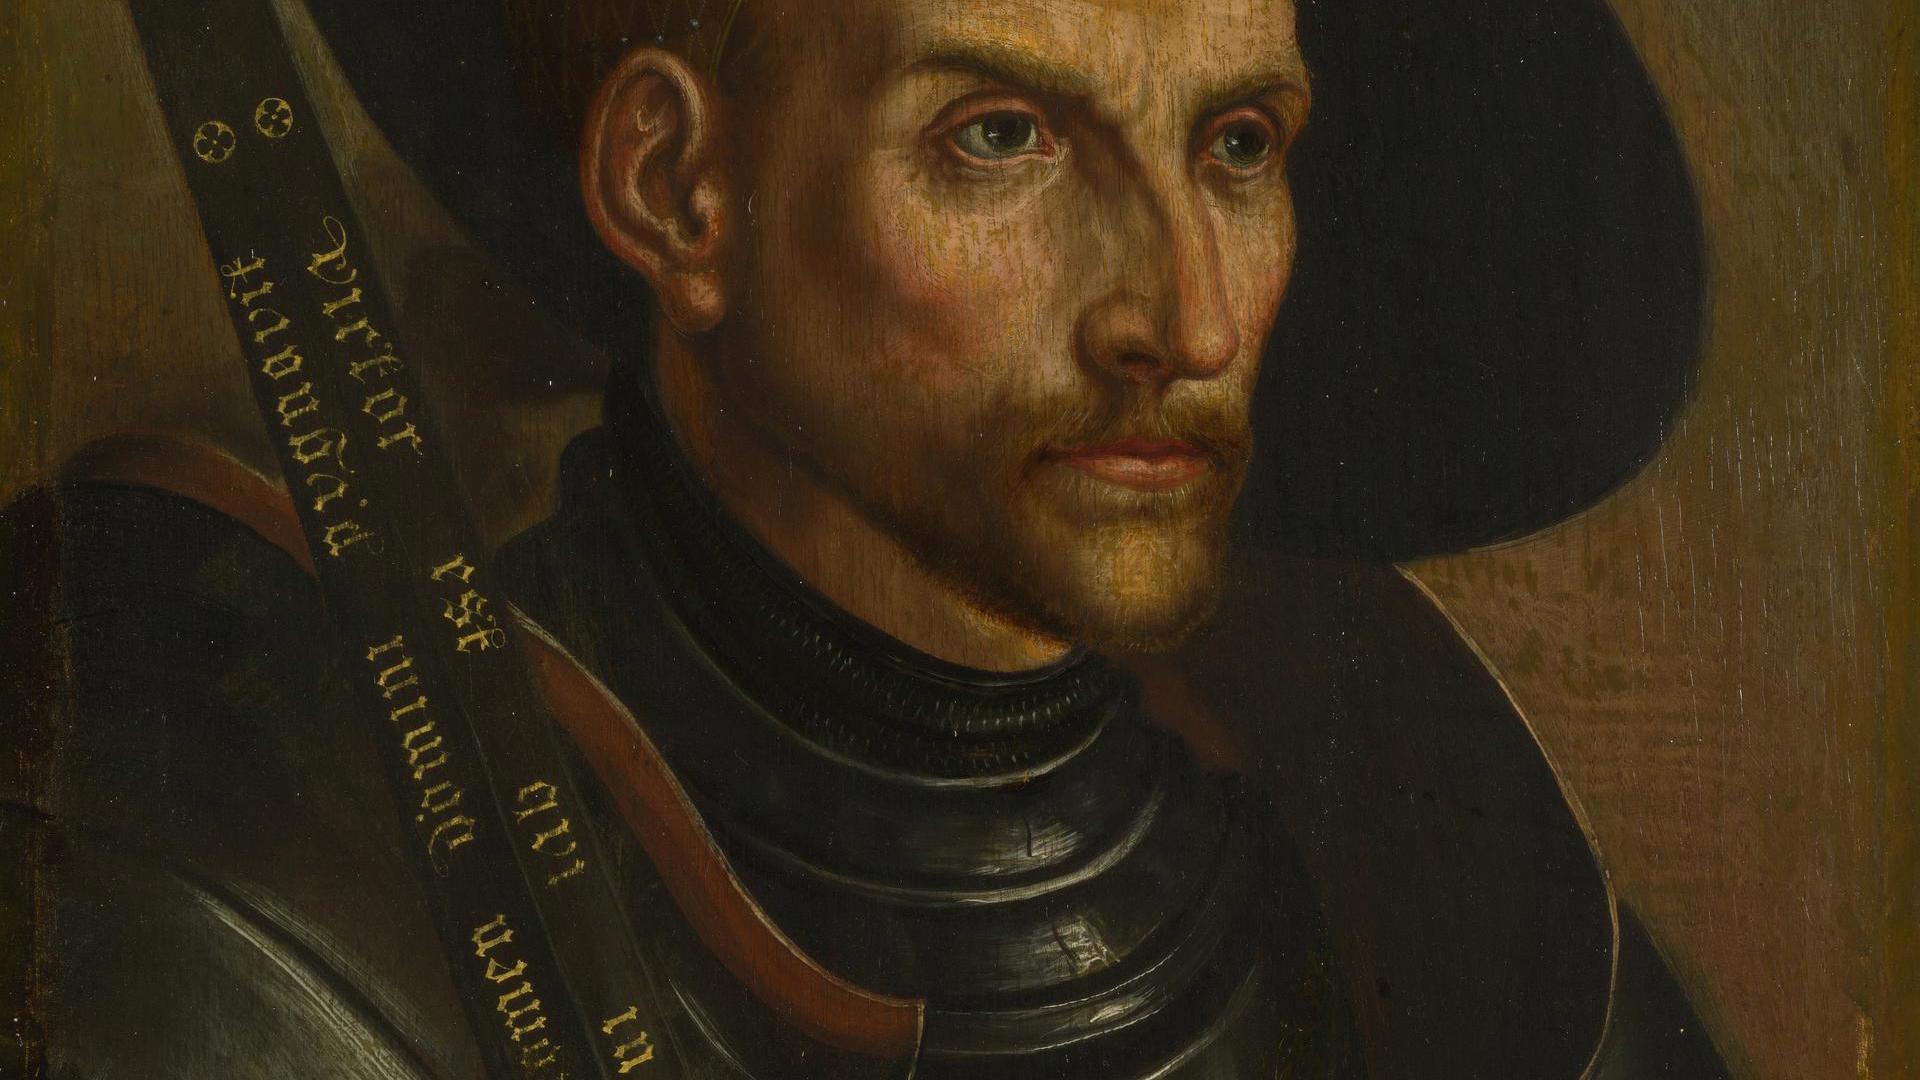 Edzard the Great, Count of East Friesland by German